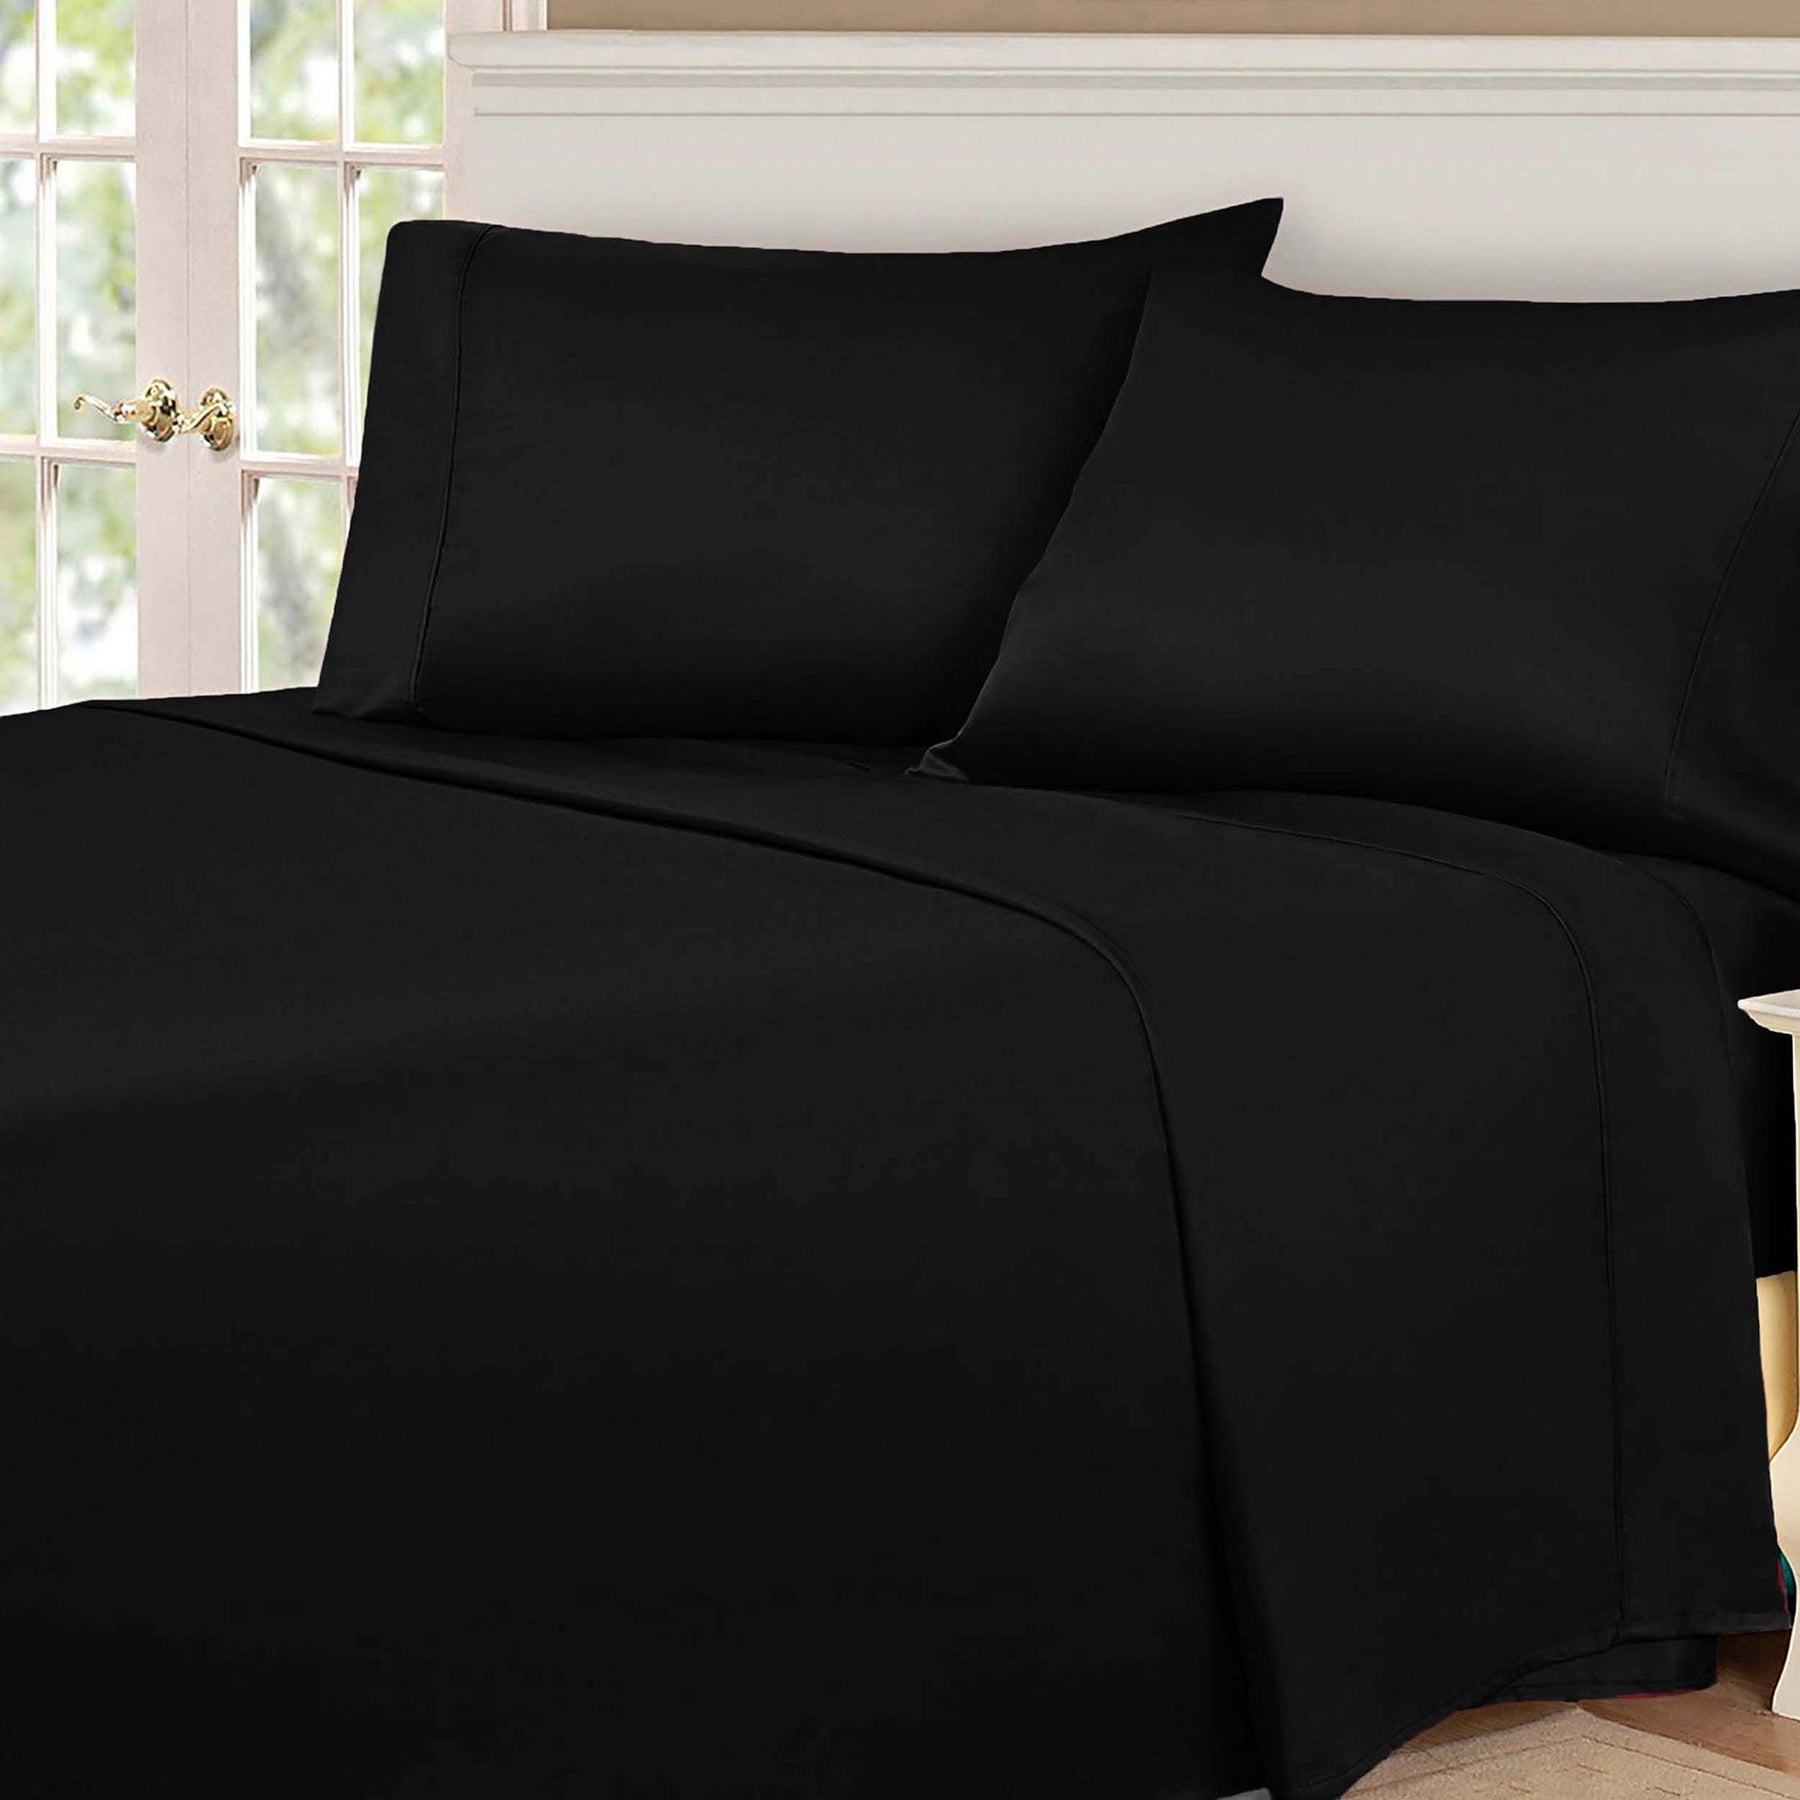  Superior Egyptian Cotton 530 Thread Count Solid Sheet Set - Black